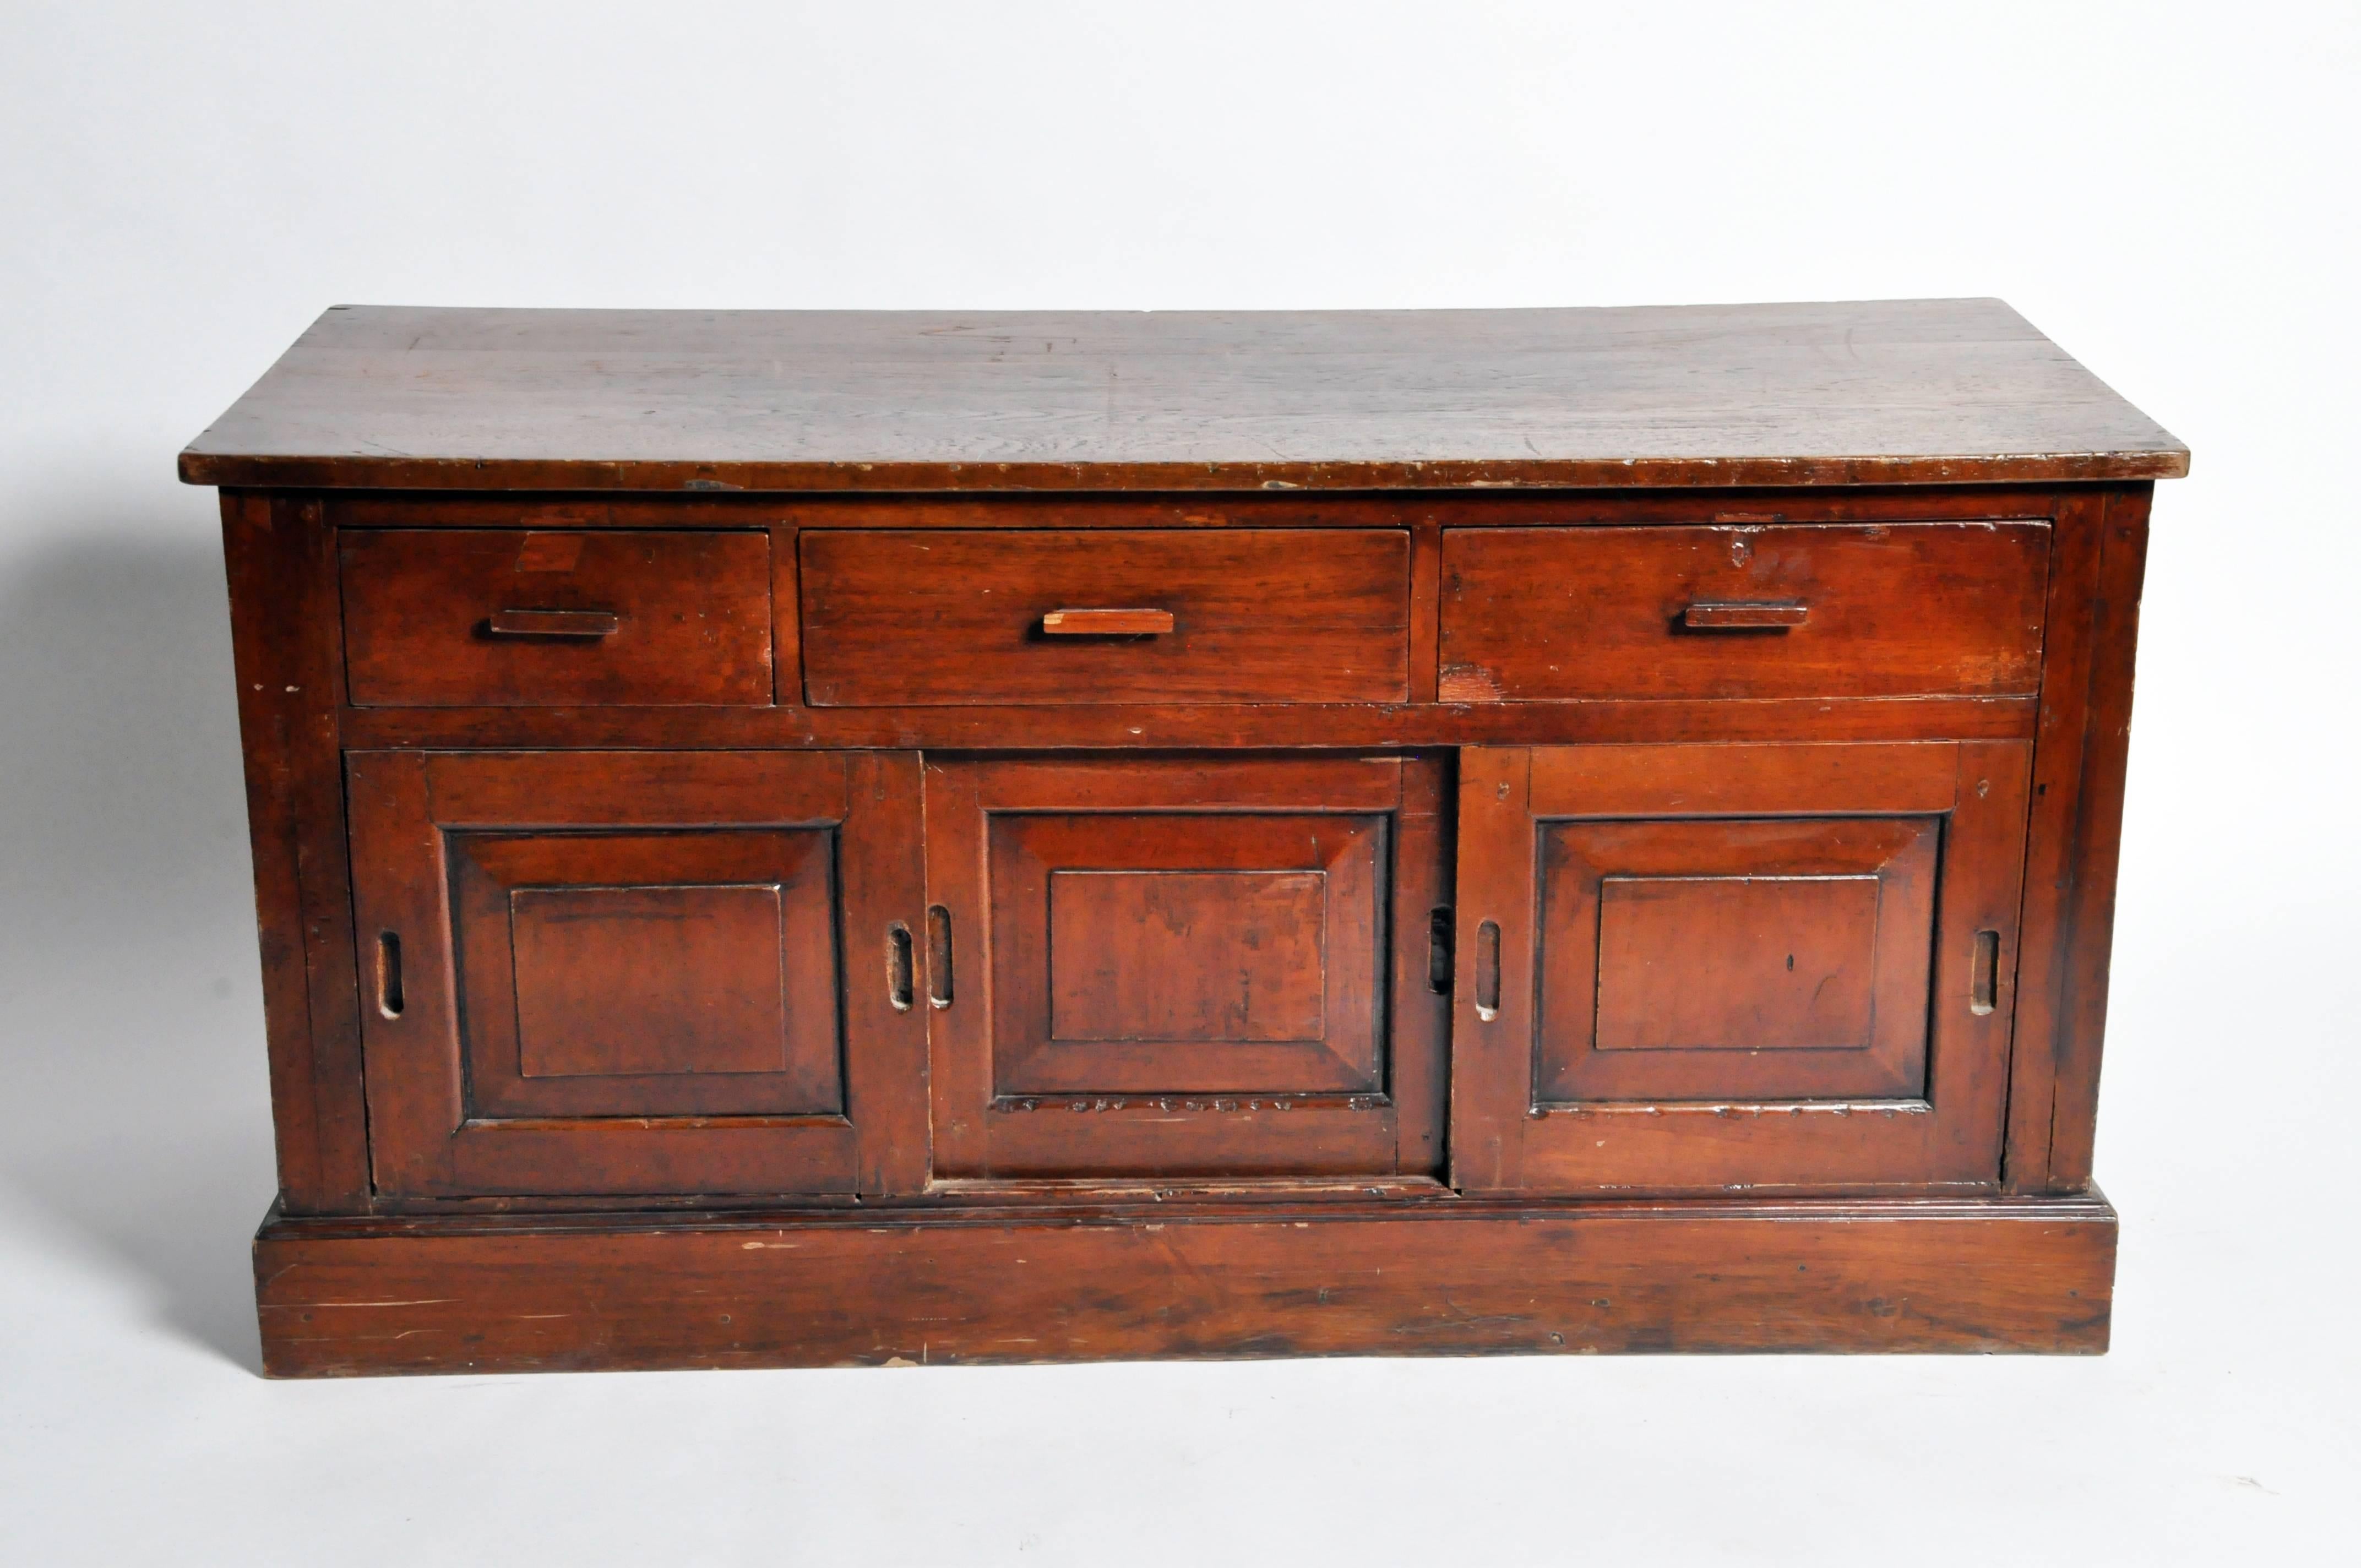 Taking its design inspiration from across the pond, this stately British Colonial merchant’s counter features a unique combination of neoclassical lines and striking teak wood.